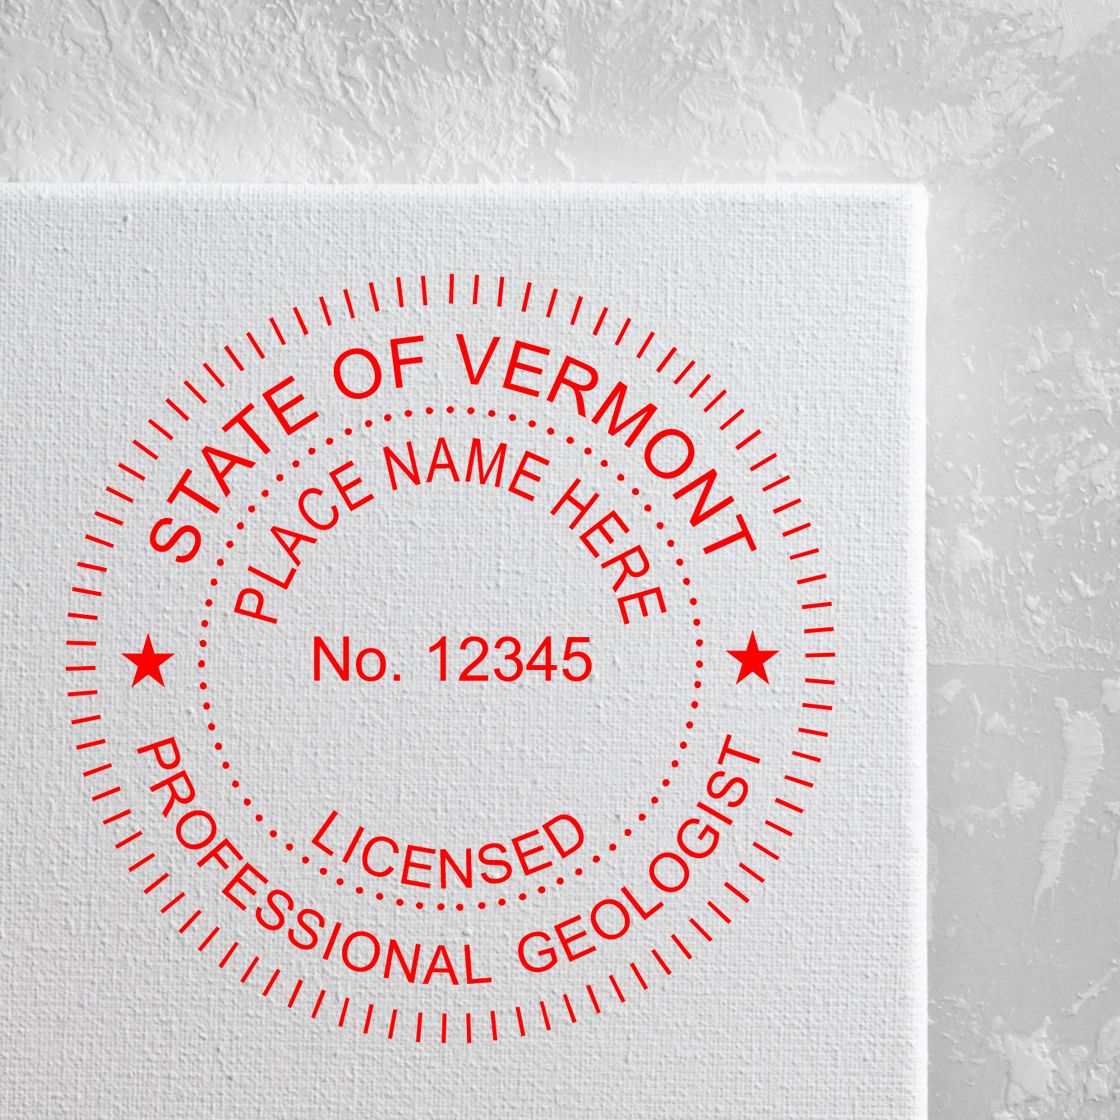 A stamped imprint of the Slim Pre-Inked Vermont Professional Geologist Seal Stamp in this stylish lifestyle photo, setting the tone for a unique and personalized product.